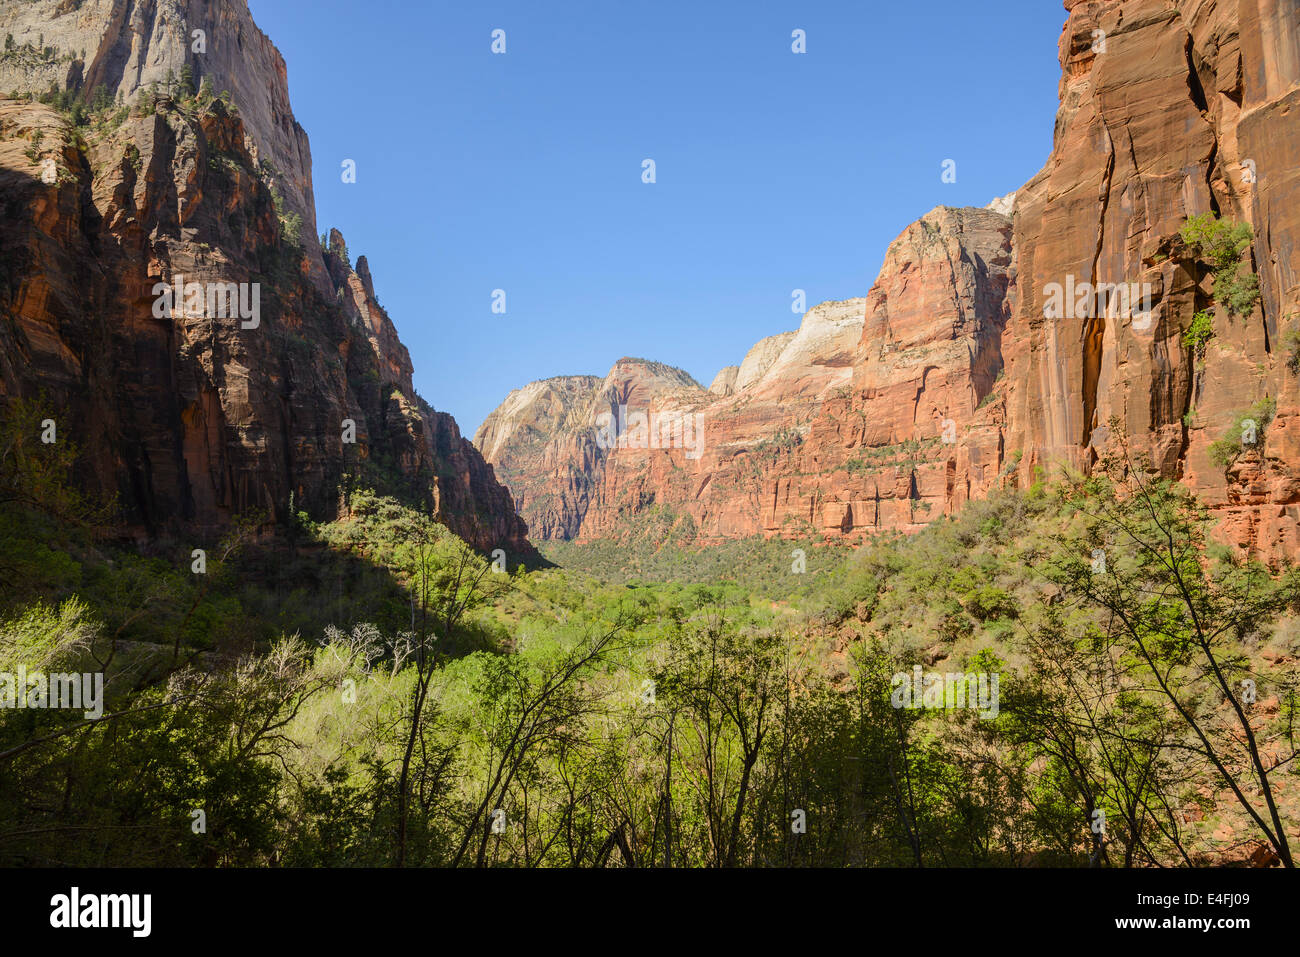 View from Weeping Rock, Zion National Park, Utah, USA Stock Photo